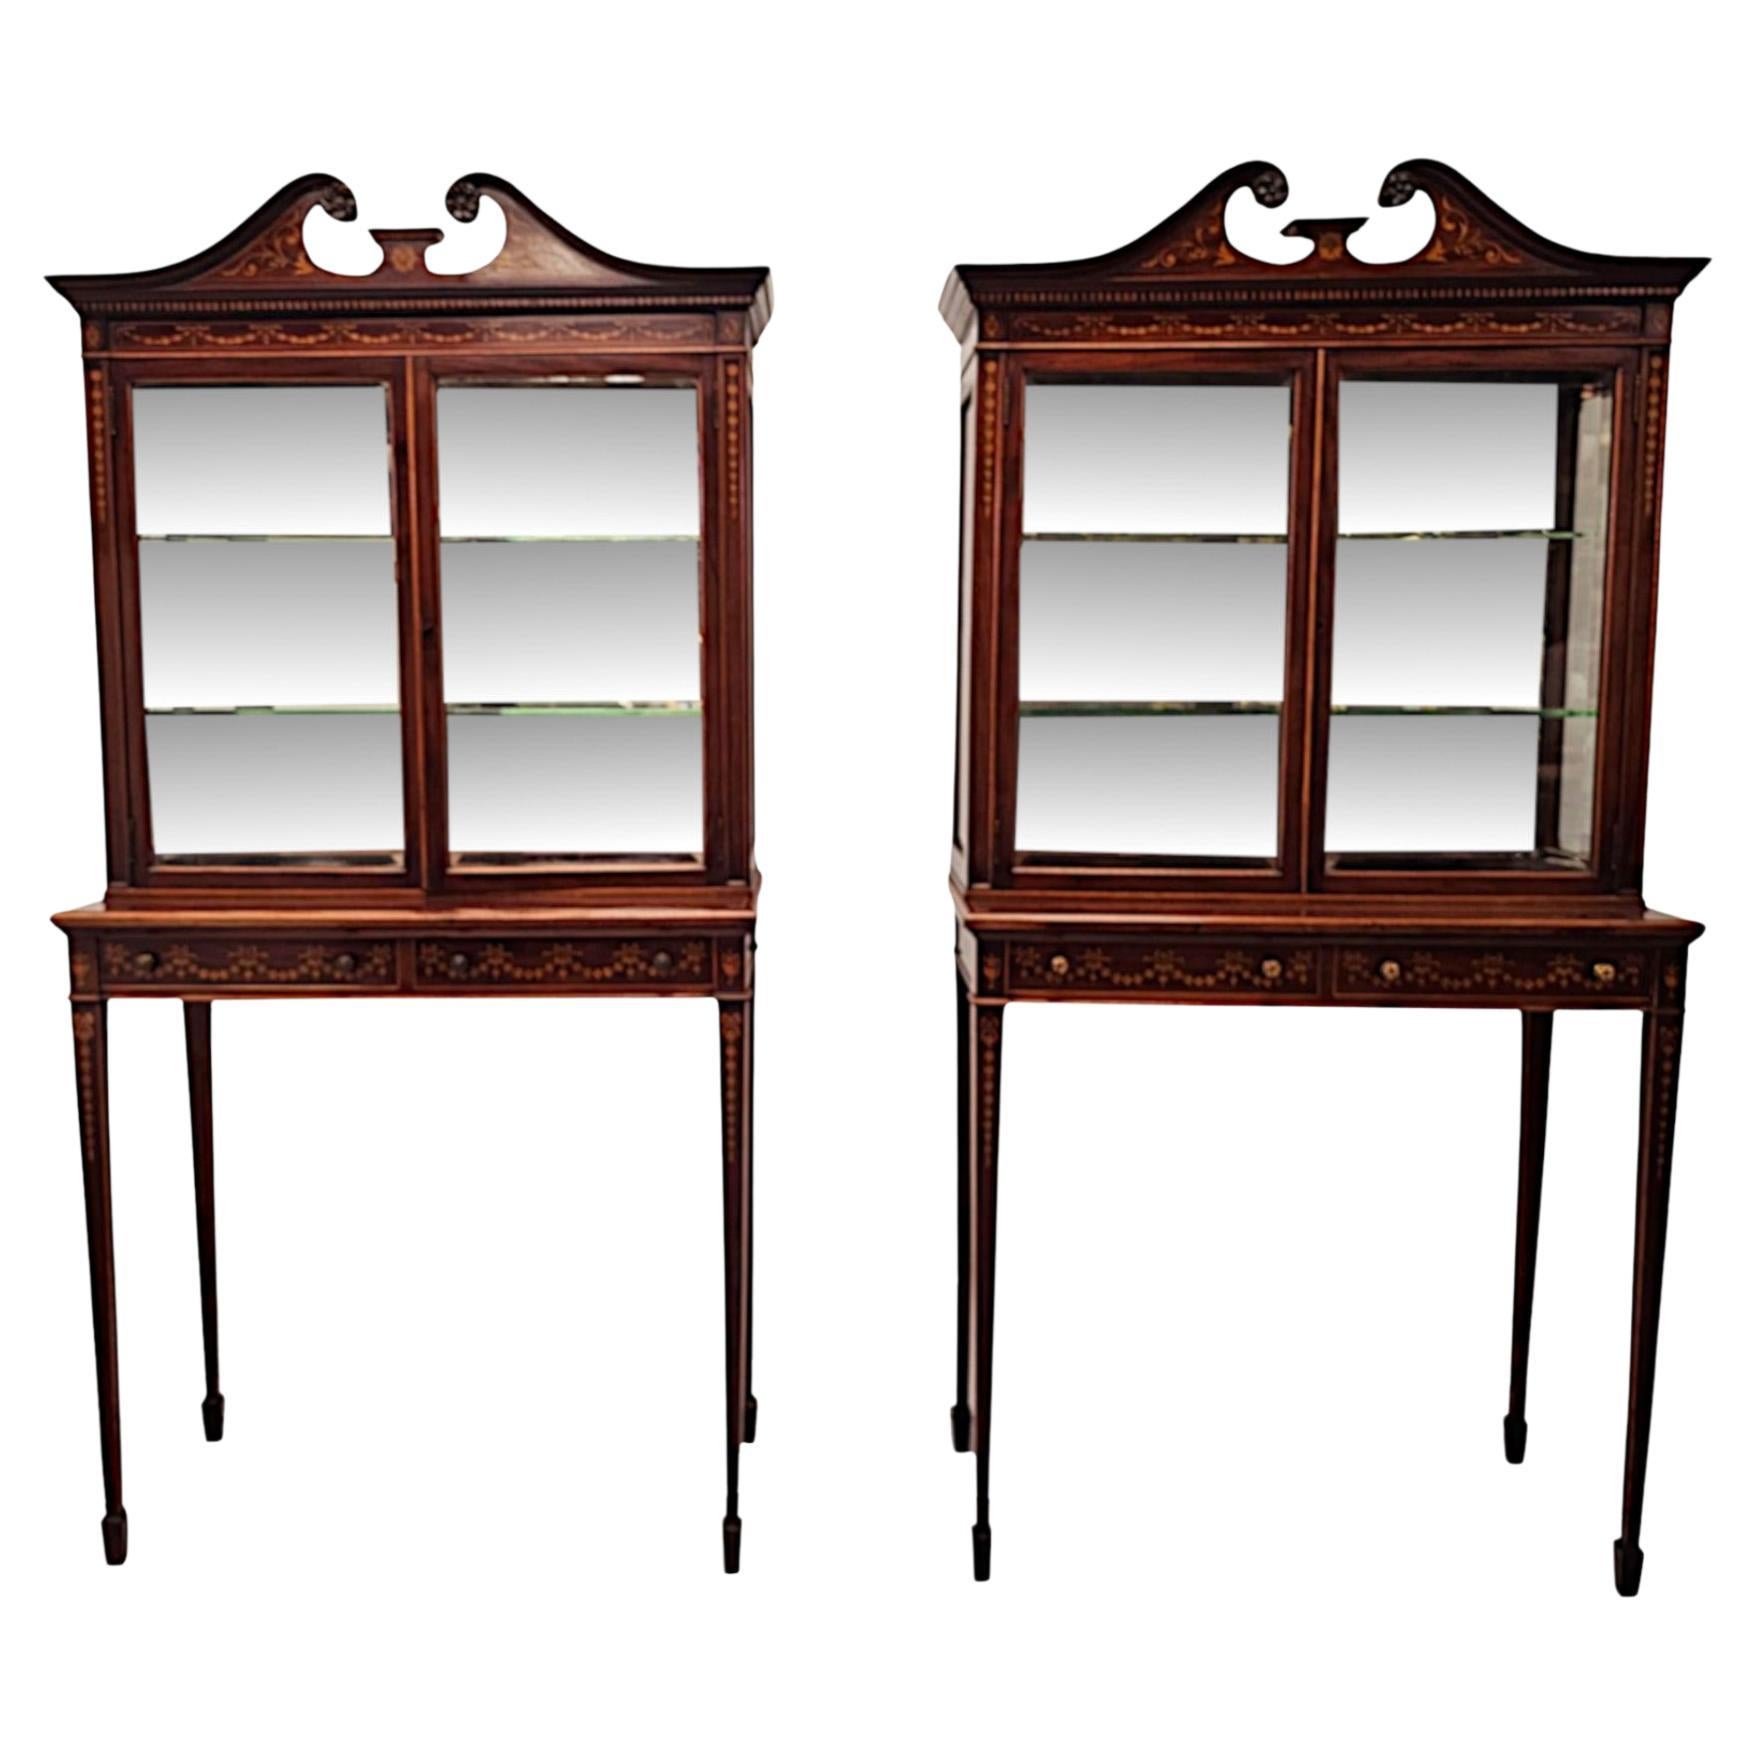 A Rare Pair of Edwardian Pier Cabinets or Bookcases after Edward and Roberts For Sale